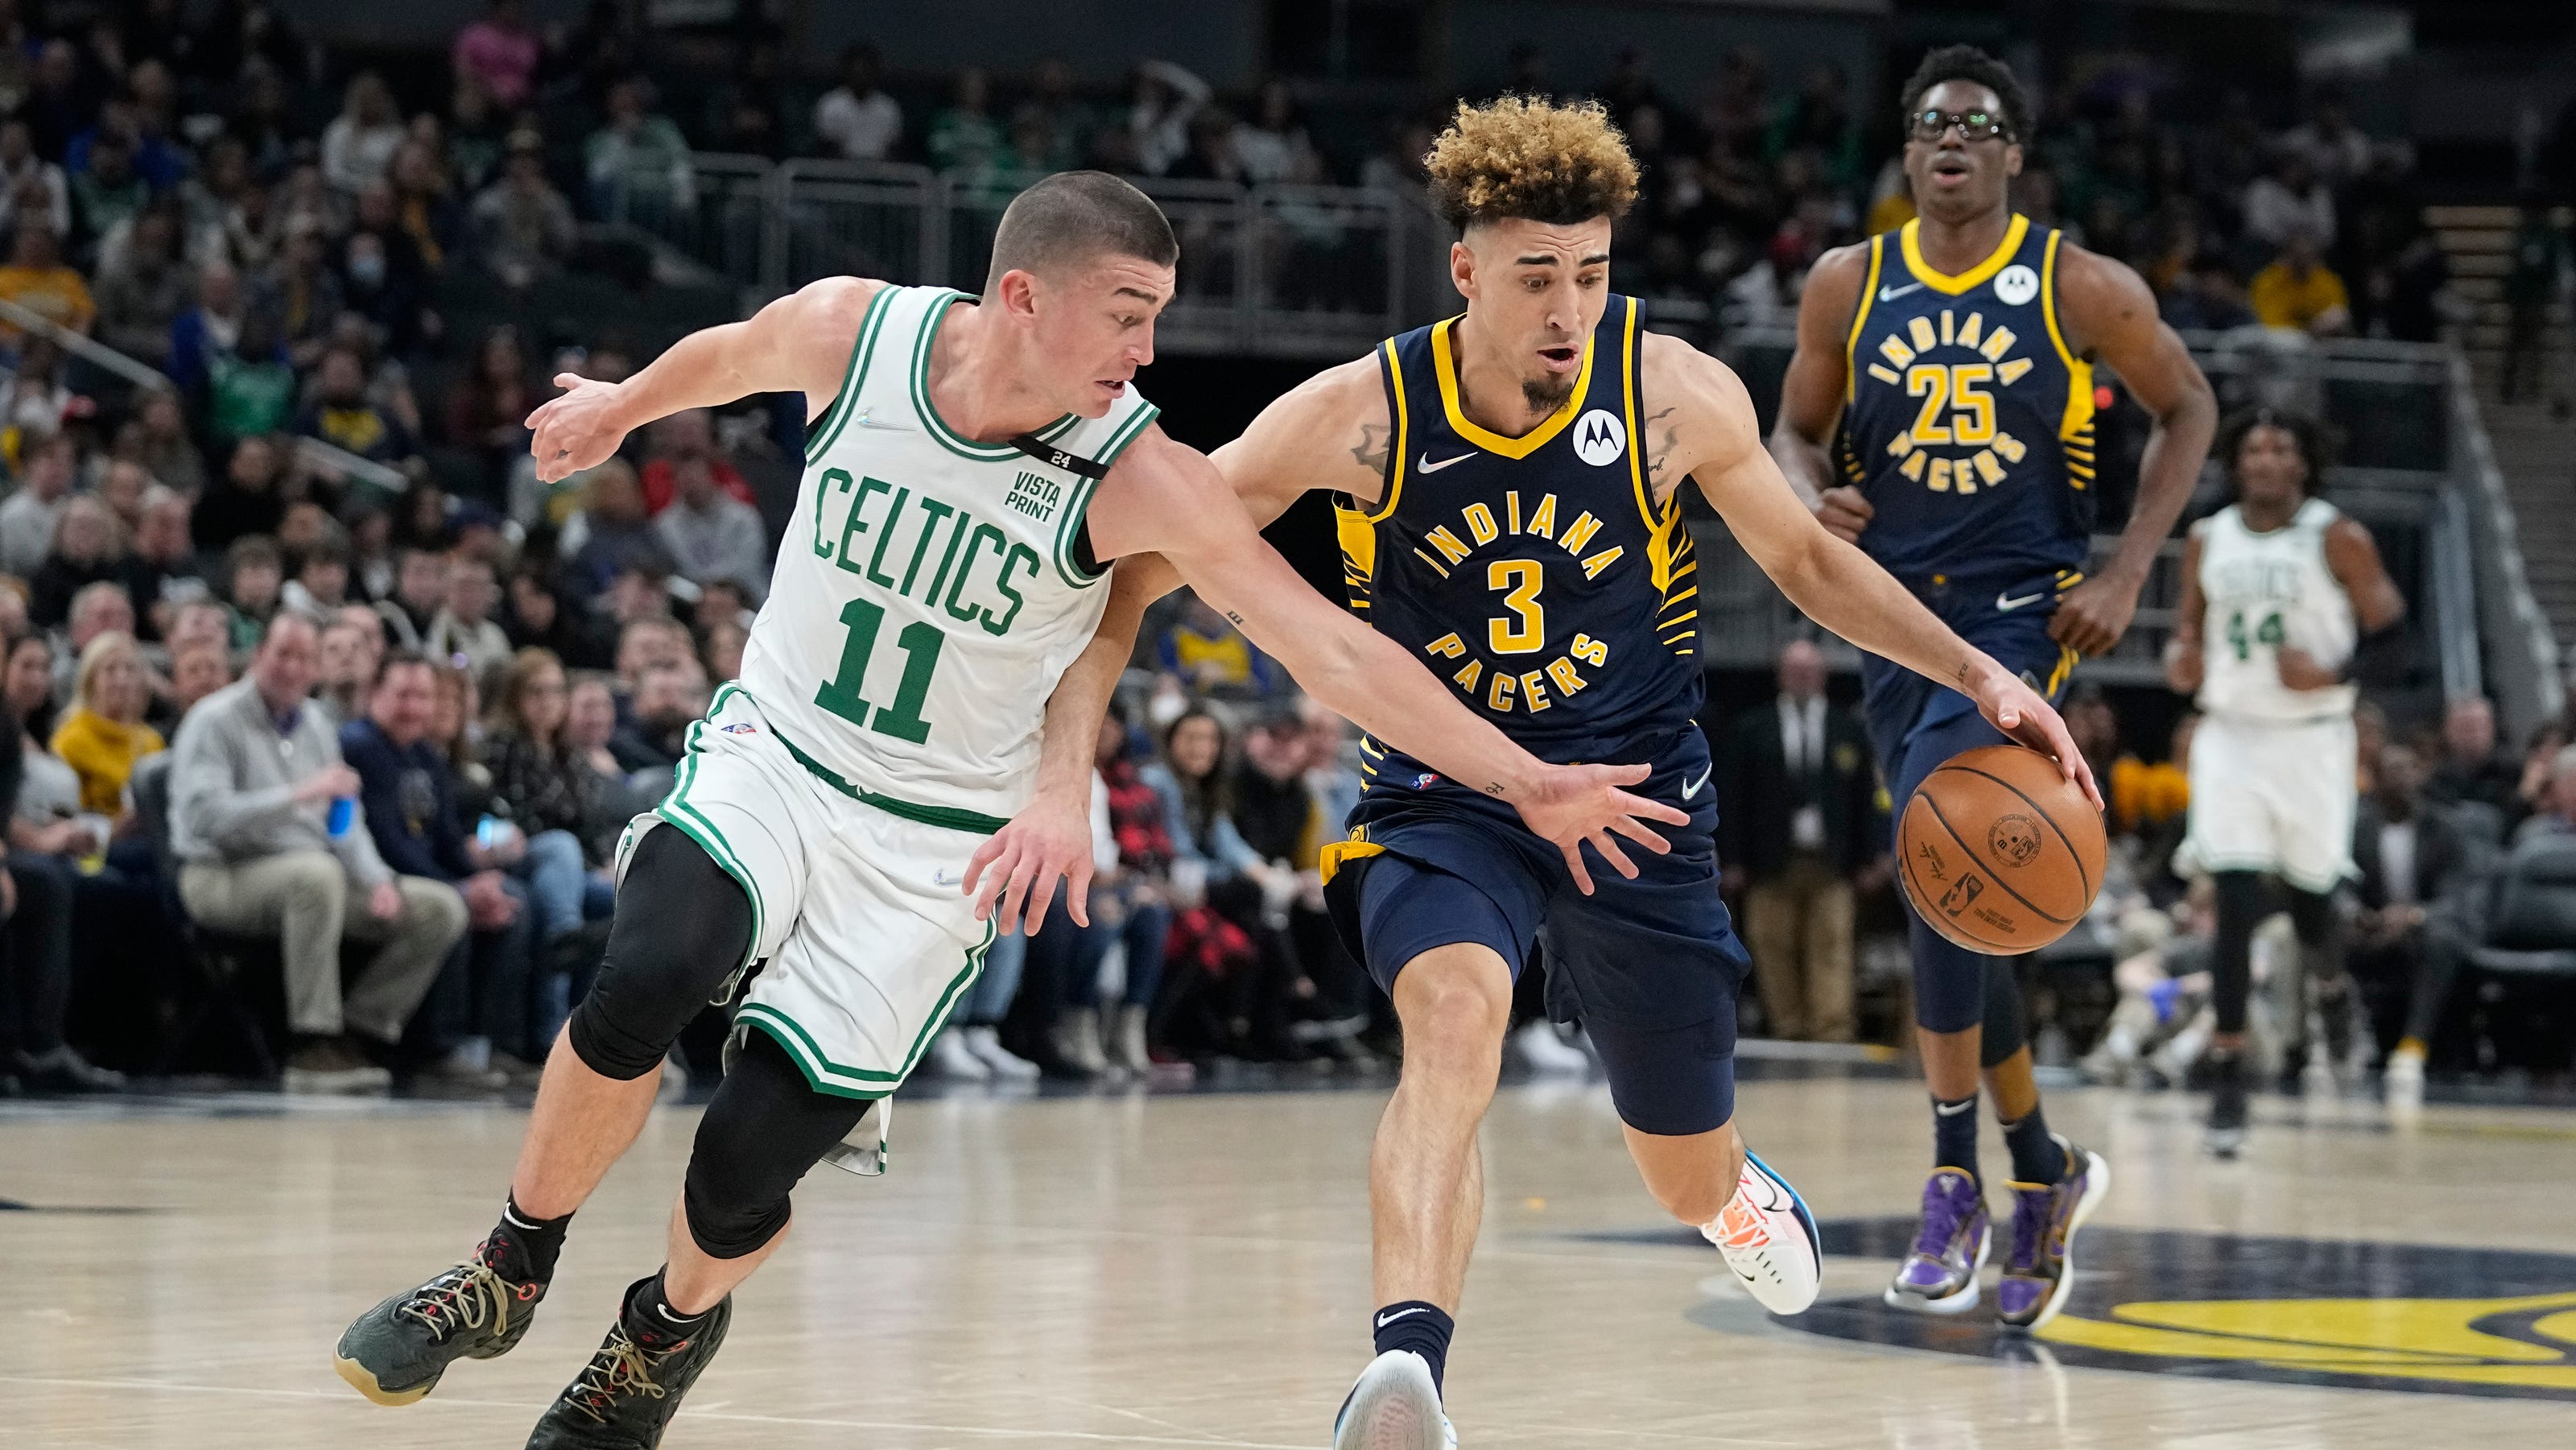 People keep calling Chris Duarte old but 25-year-old will play key role for young Pacers